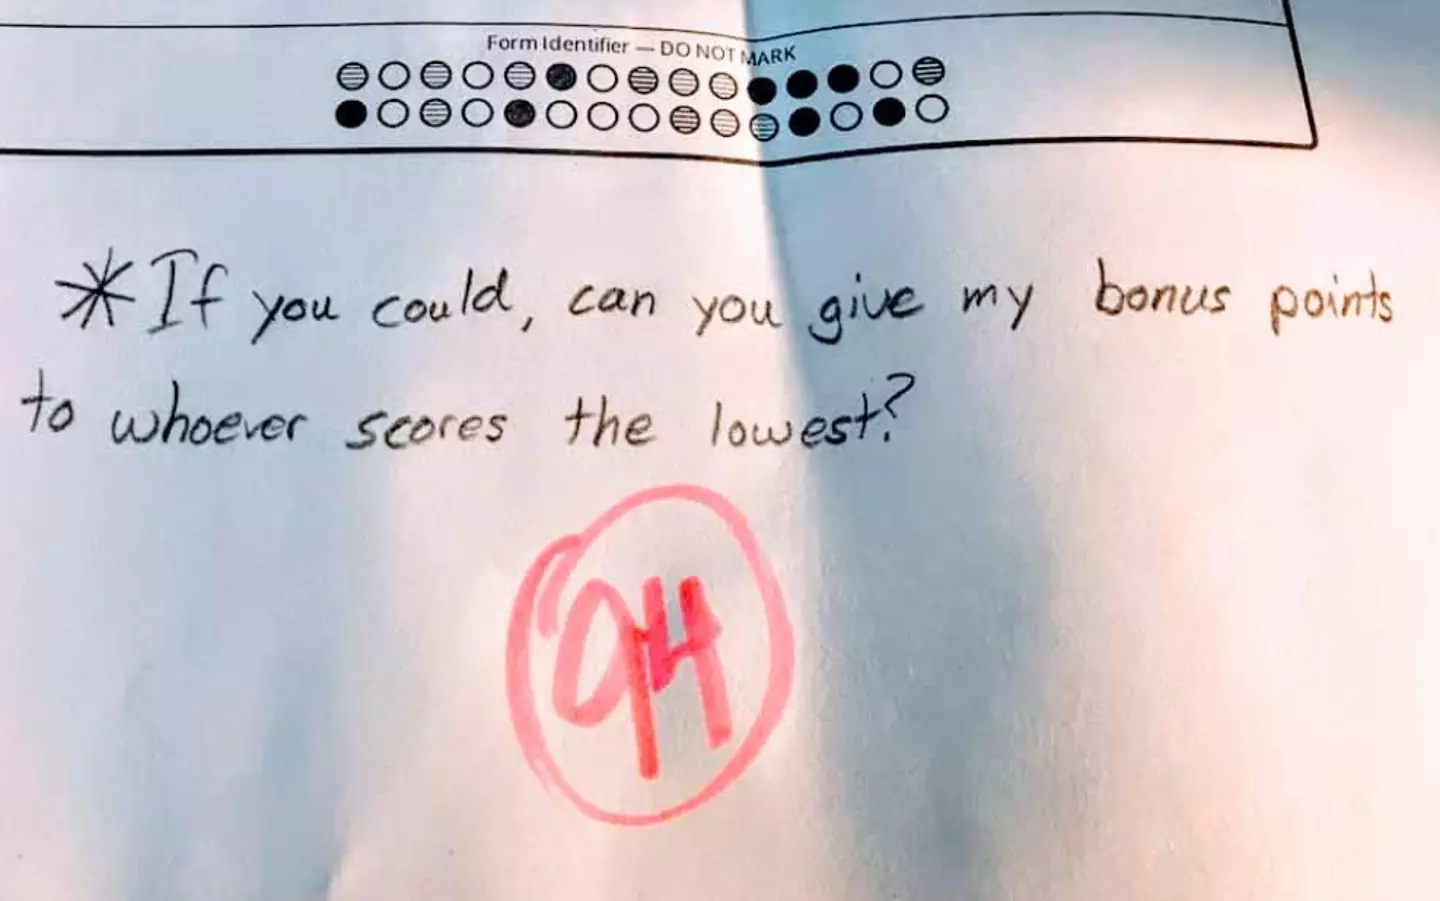 The student wrote the note to his teacher on the test.